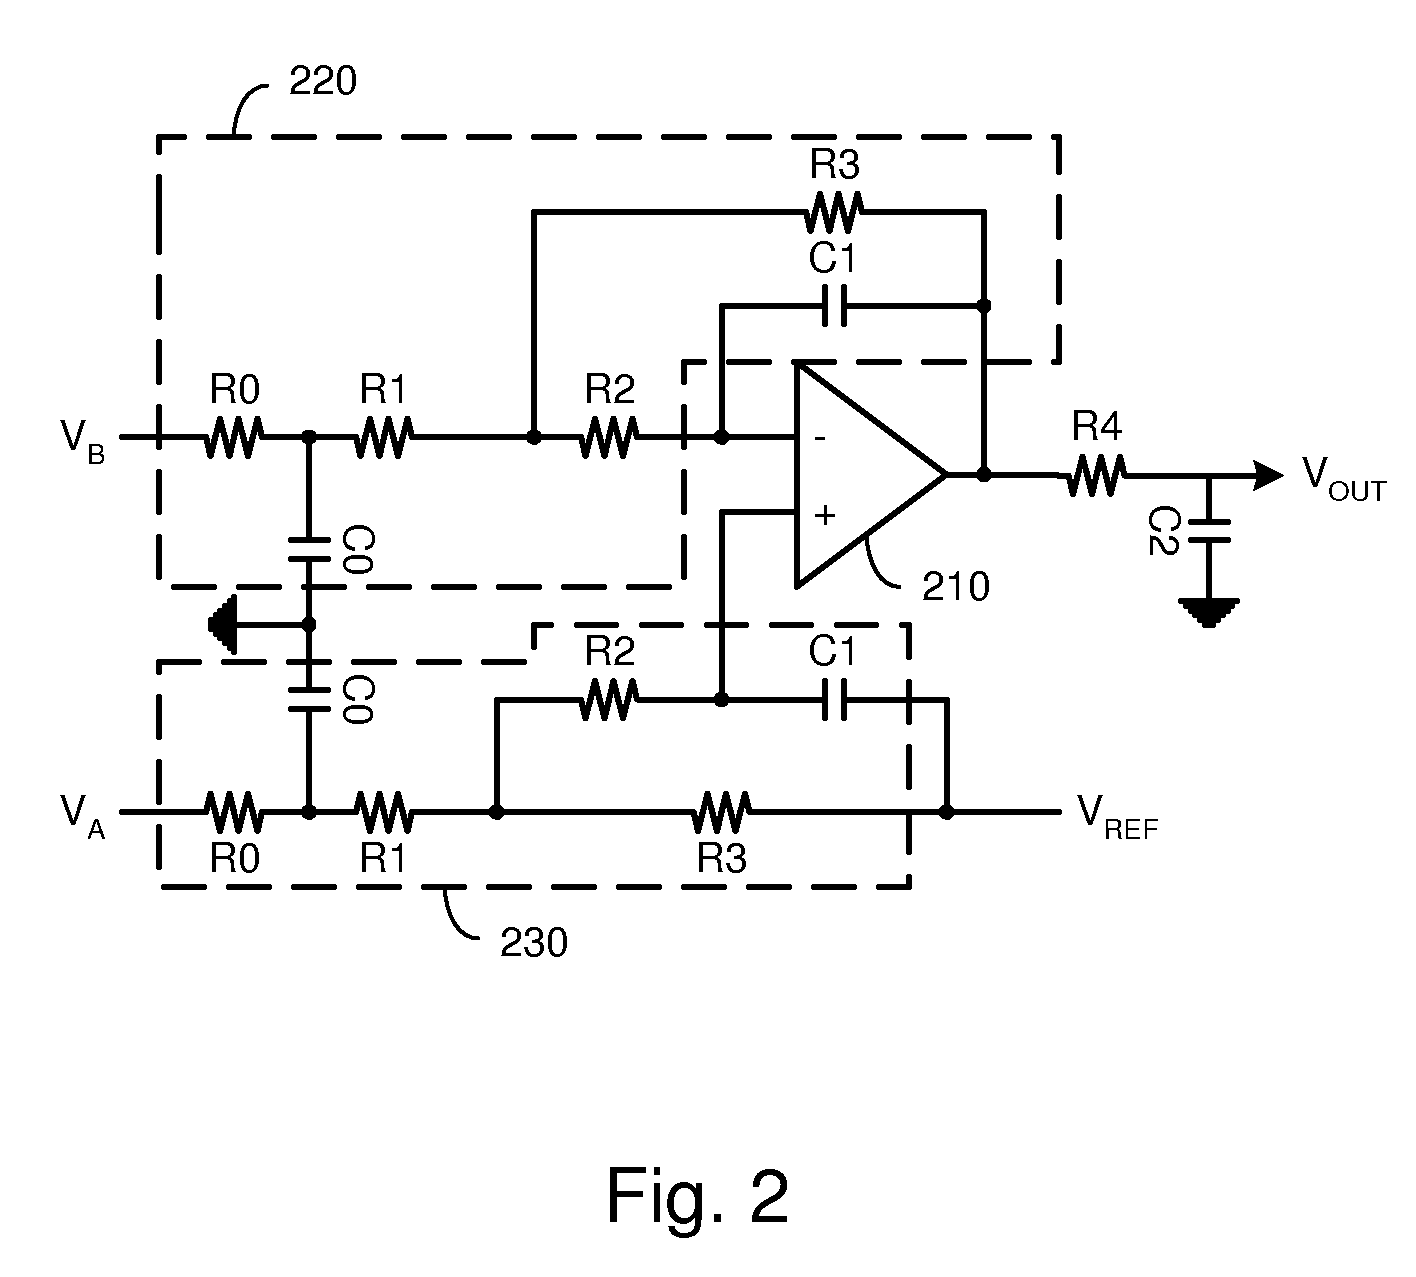 Systems and Methods for Correcting Errors Resulting from Component Mismatch in a Feedback Path